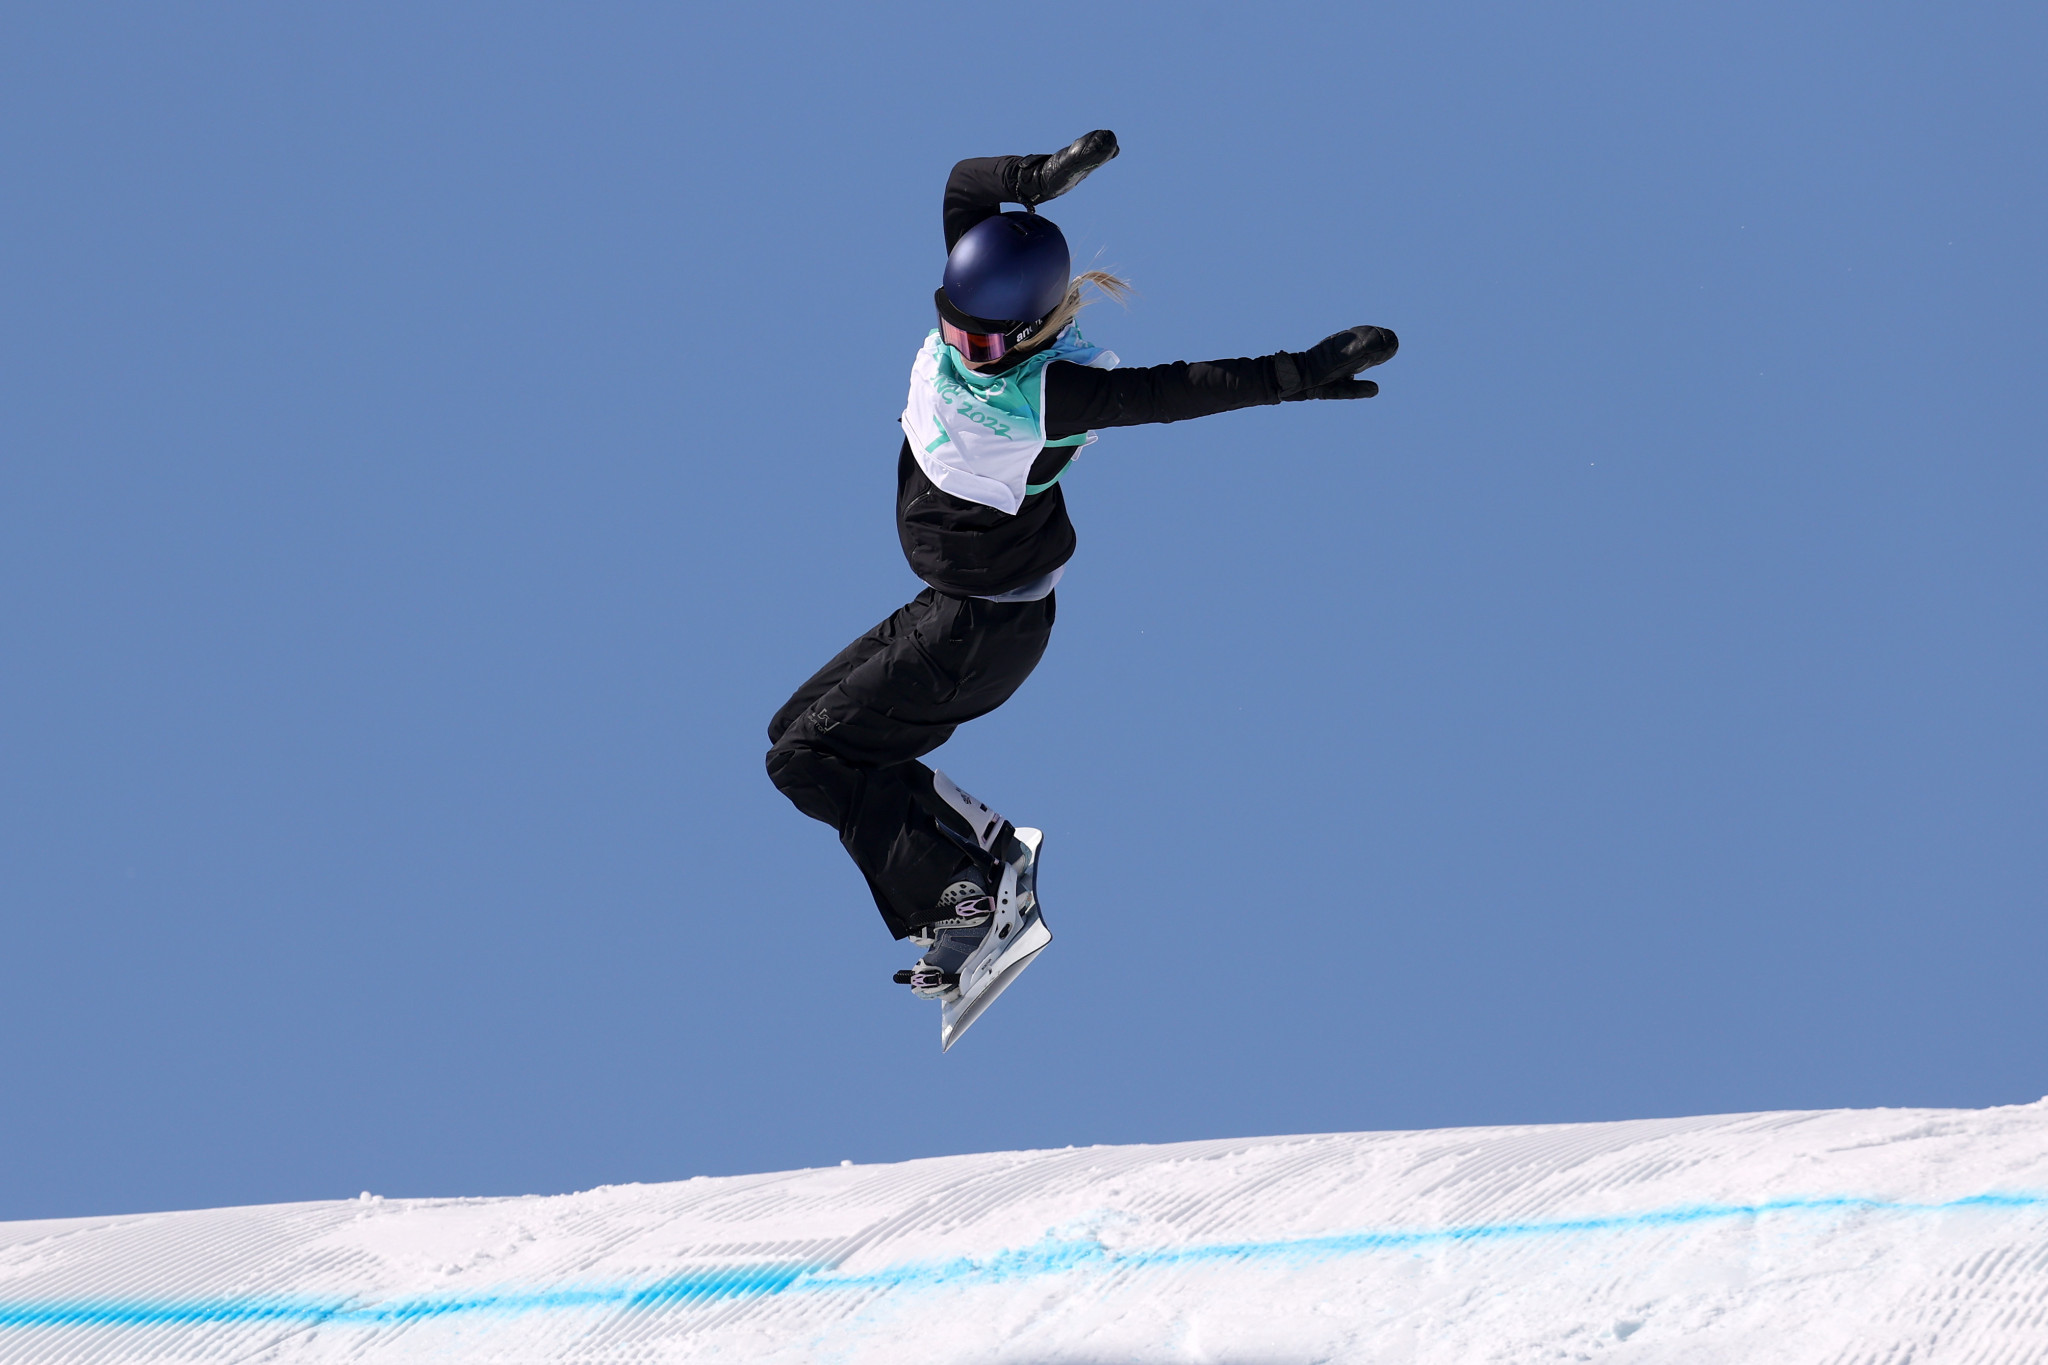 Austria's Anna Gasser landed a cab double cork 1260 melon to successfully defend her women's snowboard Big Air title ©Getty Images